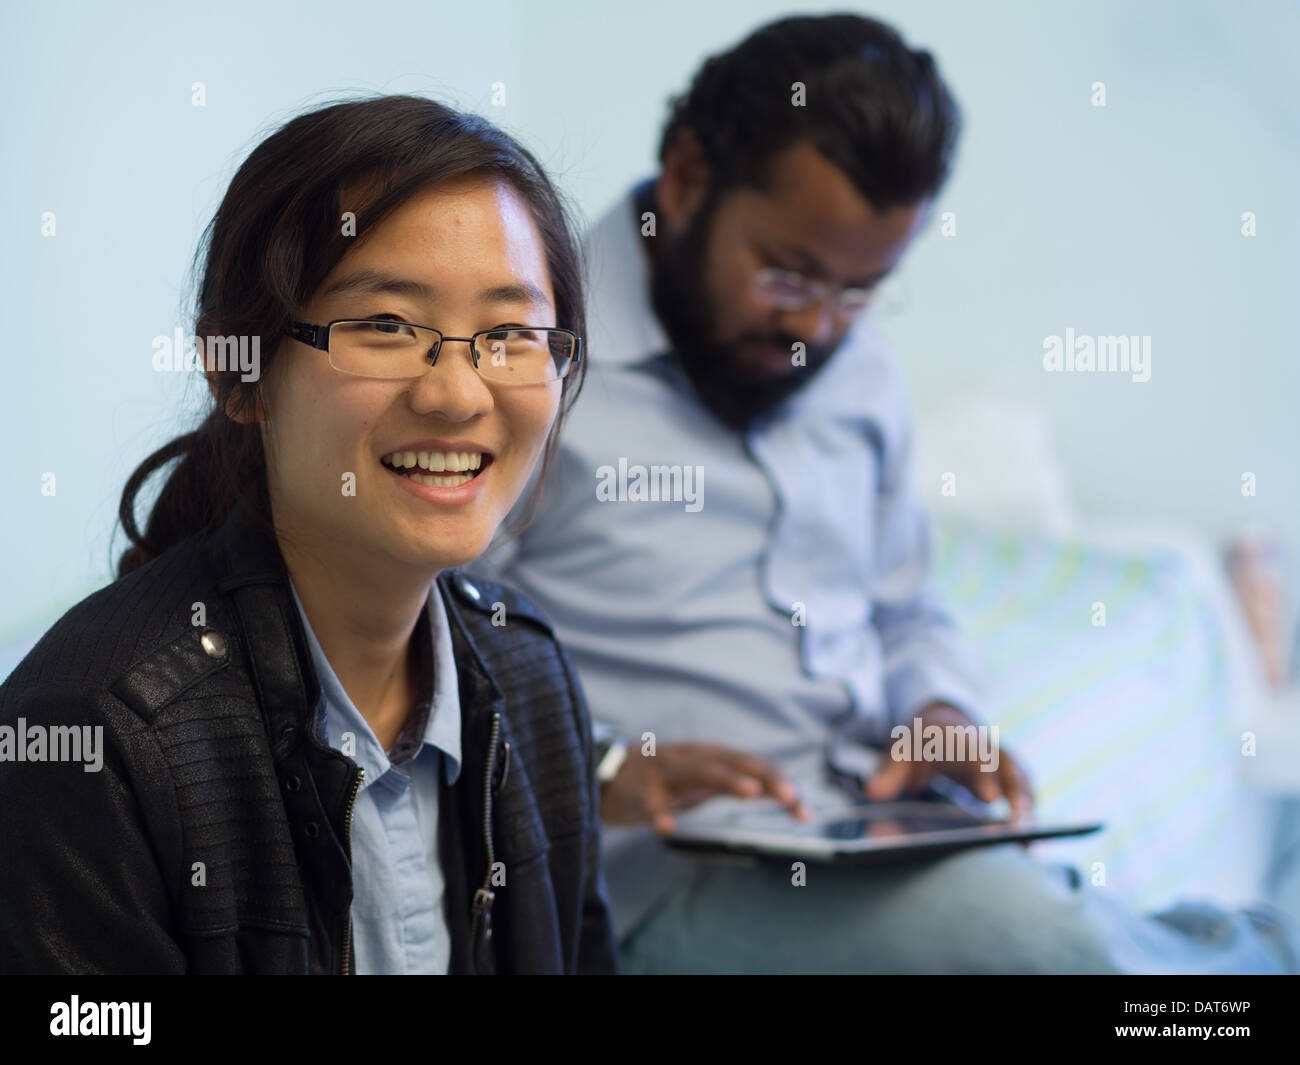 Portrait of an Asian woman smiling in foreground as an Indian man uses a tablet in the background Stock Photo